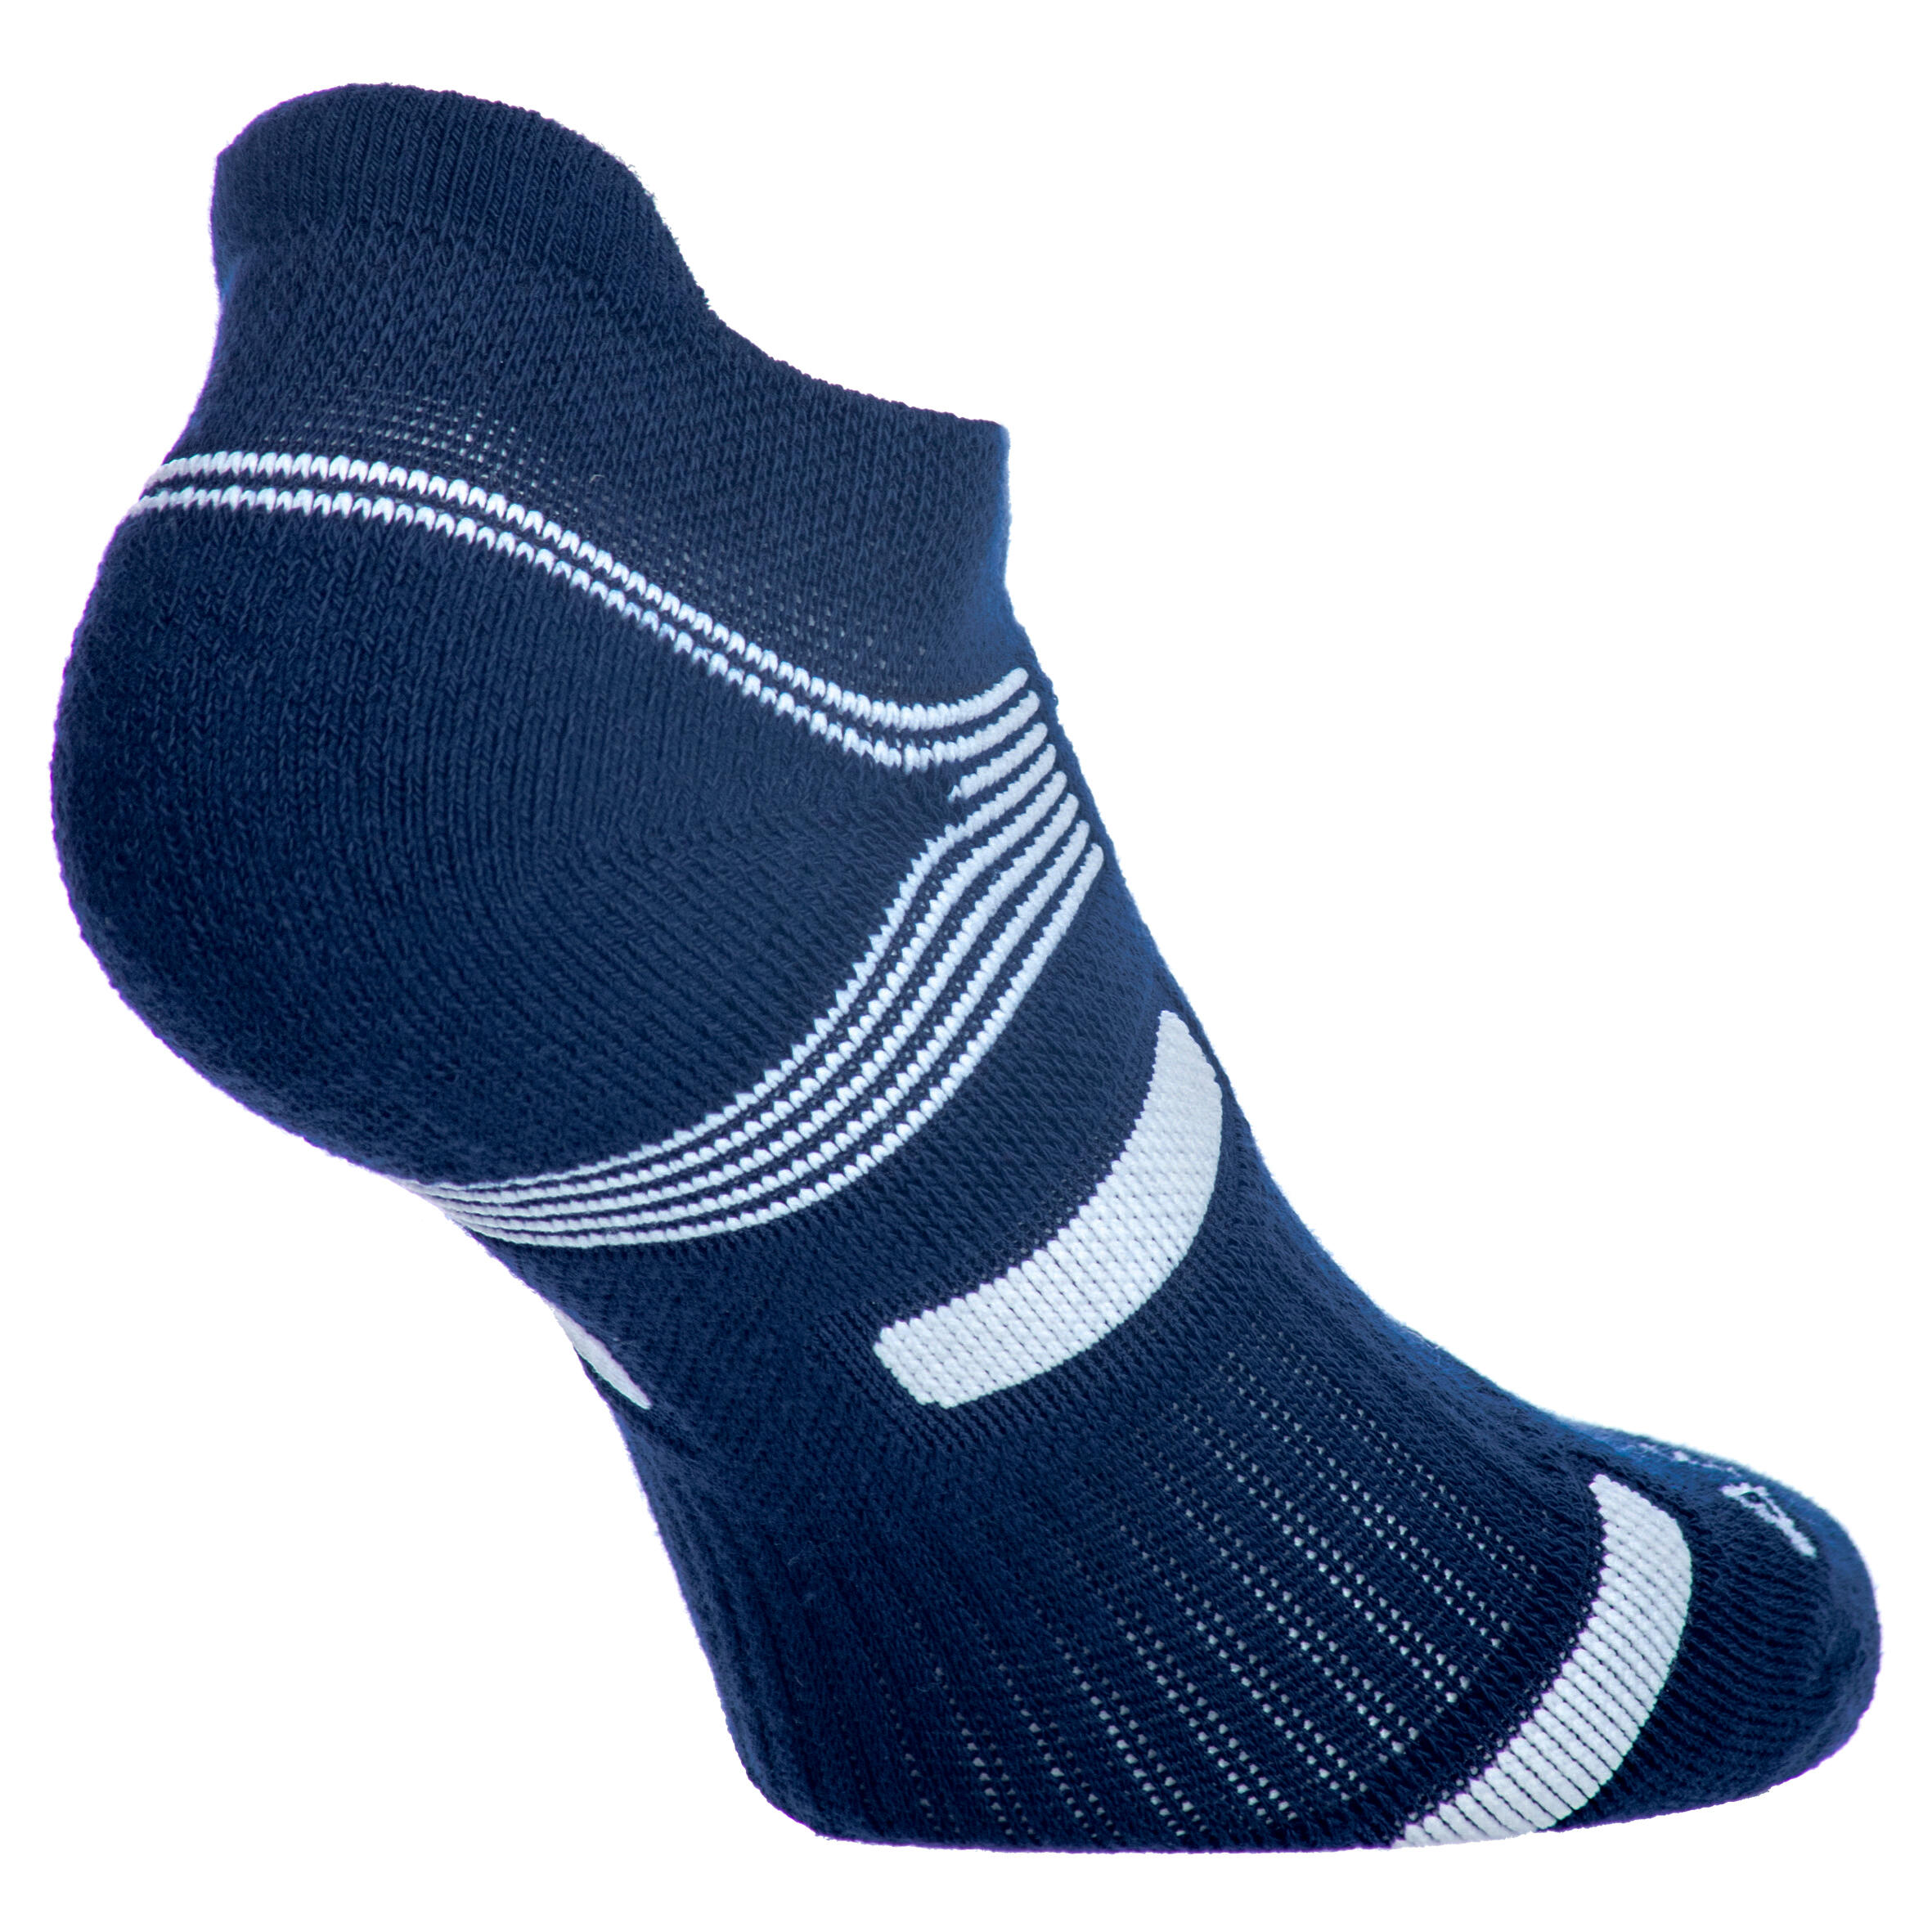 Low Sports Socks RS 560 Tri-Pack - Navy/White 9/12